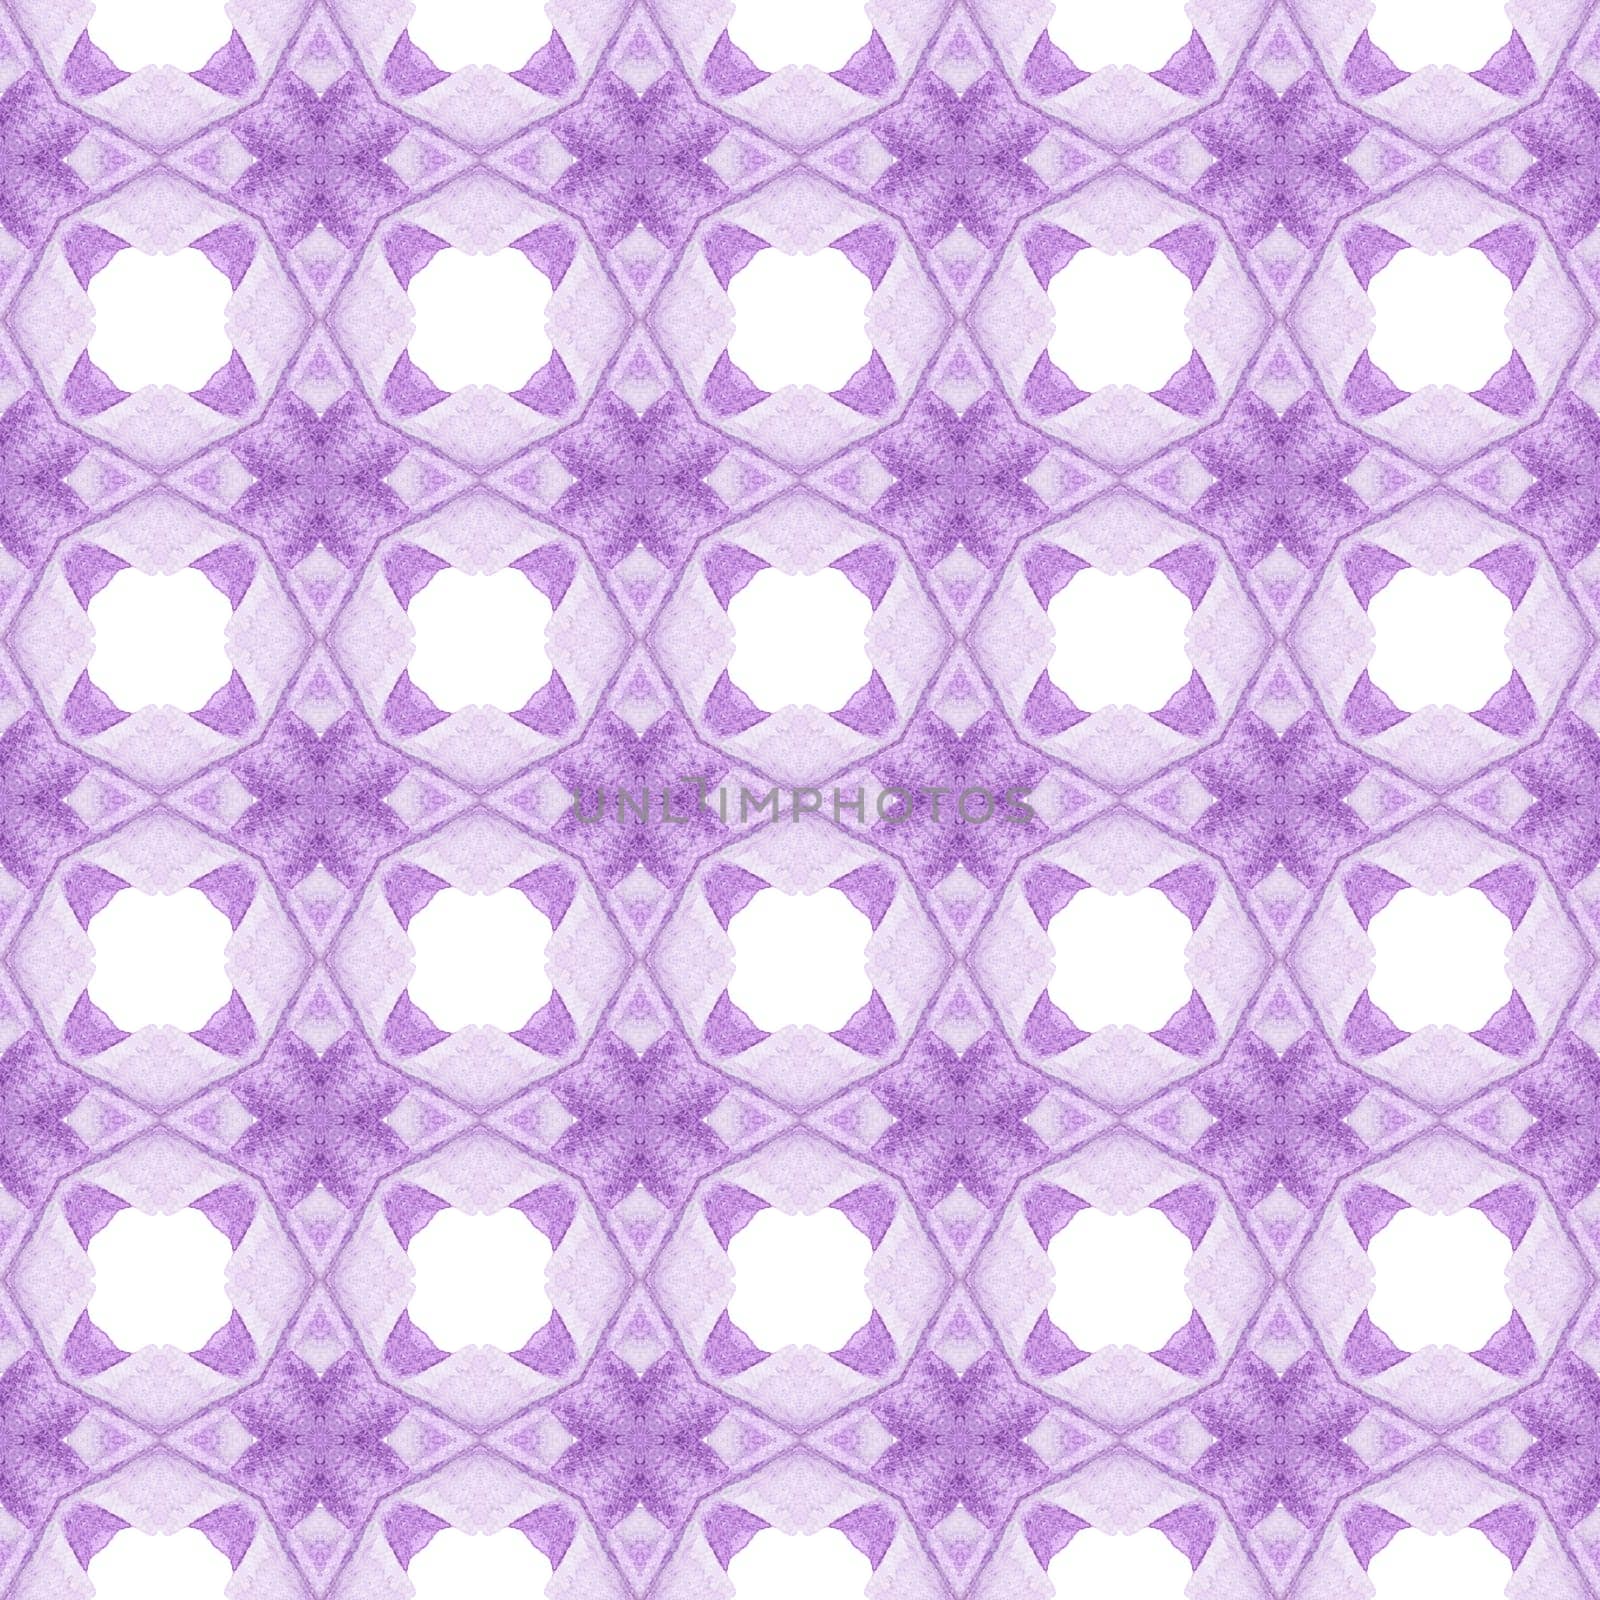 Tiled watercolor background. Purple dazzling boho chic summer design. Textile ready fancy print, swimwear fabric, wallpaper, wrapping. Hand painted tiled watercolor border.